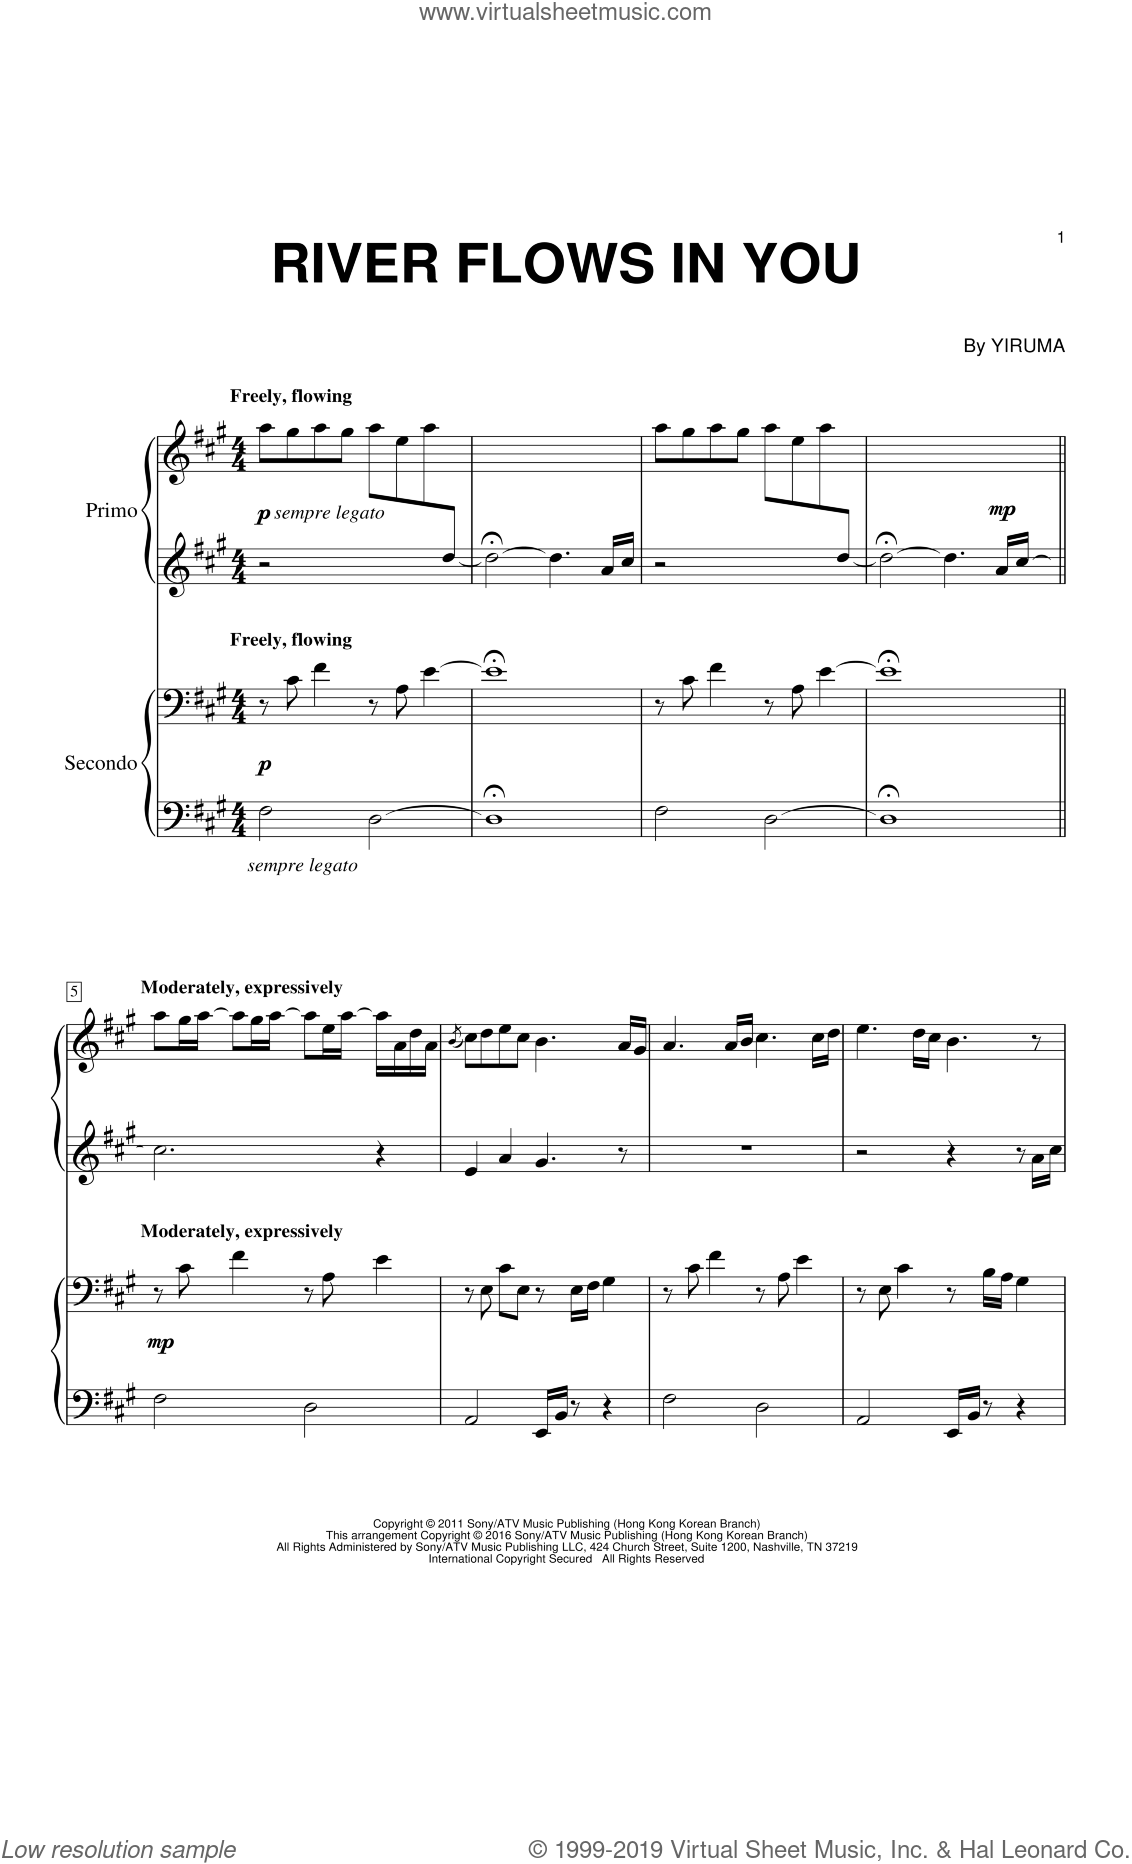 River Flows In You sheet music for piano four hands